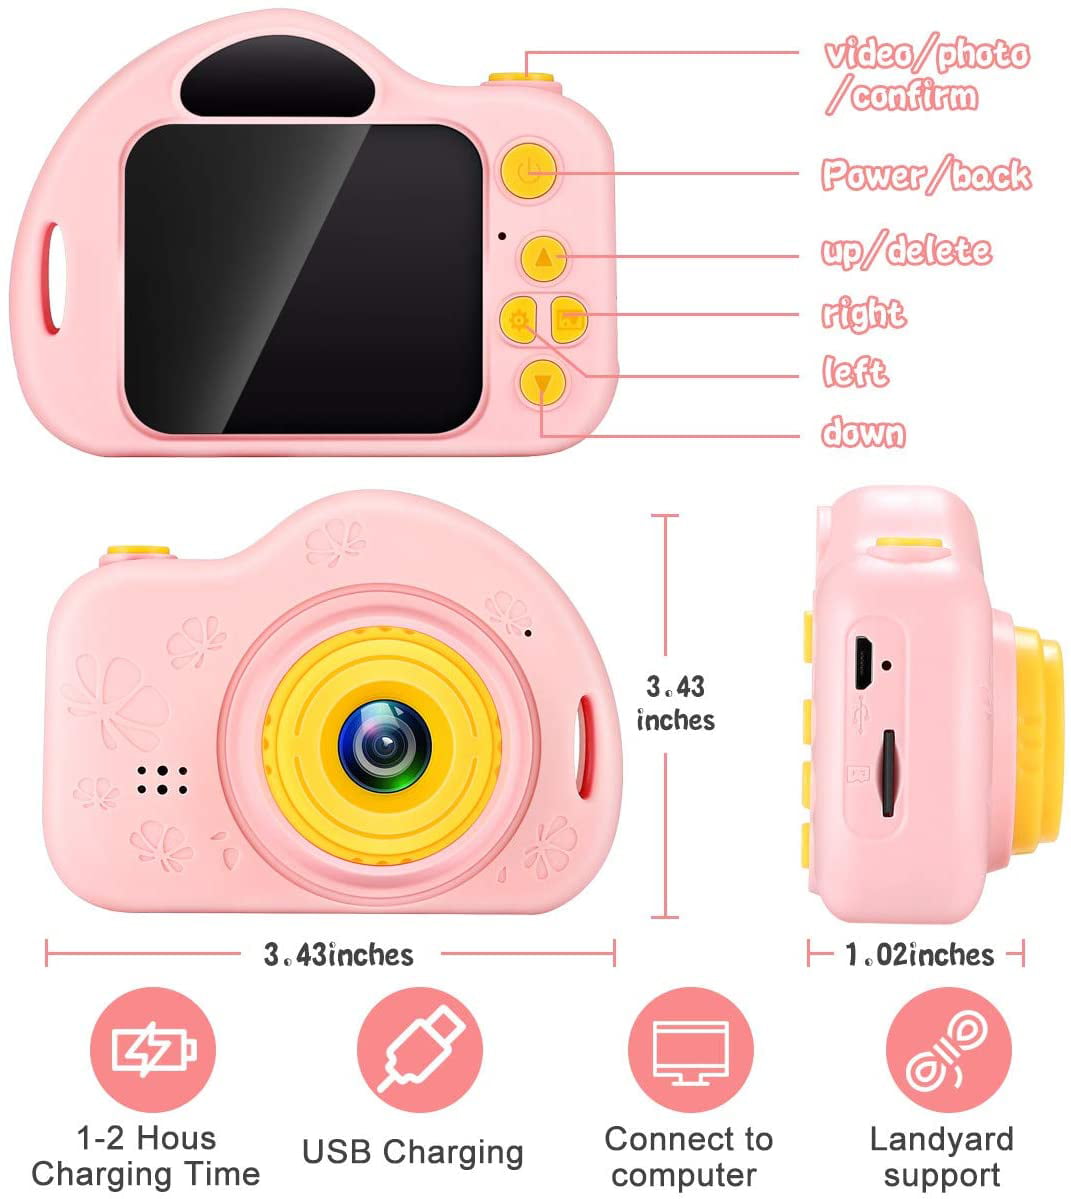 Blue voltenick Kids Camera Toys for 3-10 Year Old Girls Kids Digital Cameras 1080P 2 inch Toddler Video Camera Gift for Age 3 4 5 6 7 8 9 Years Old Girls Best Birthday Gifts with 32G SD Card 